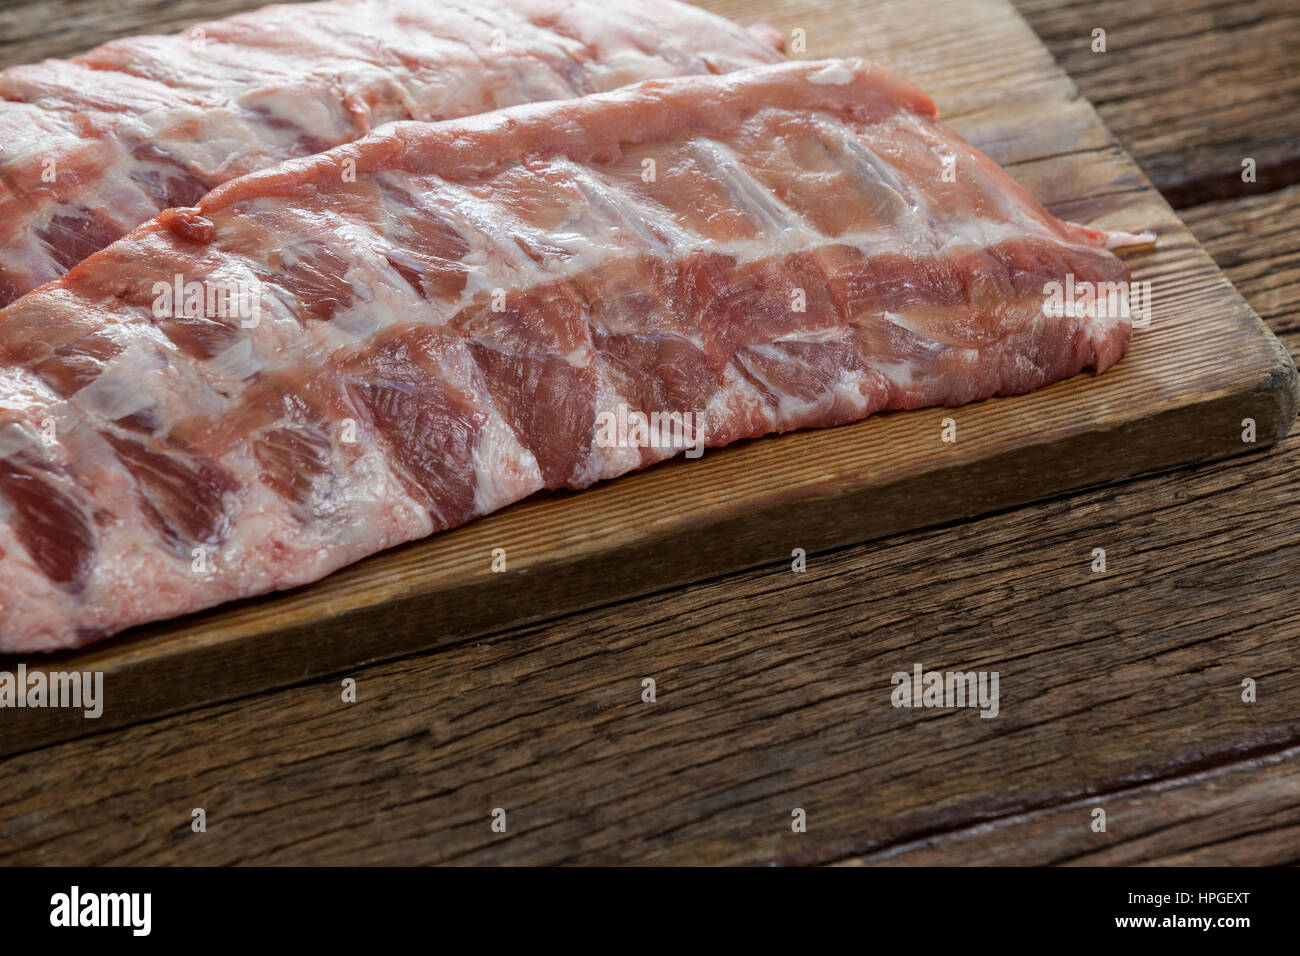 Beef ribs on wooden board against wooden background Stock Photo